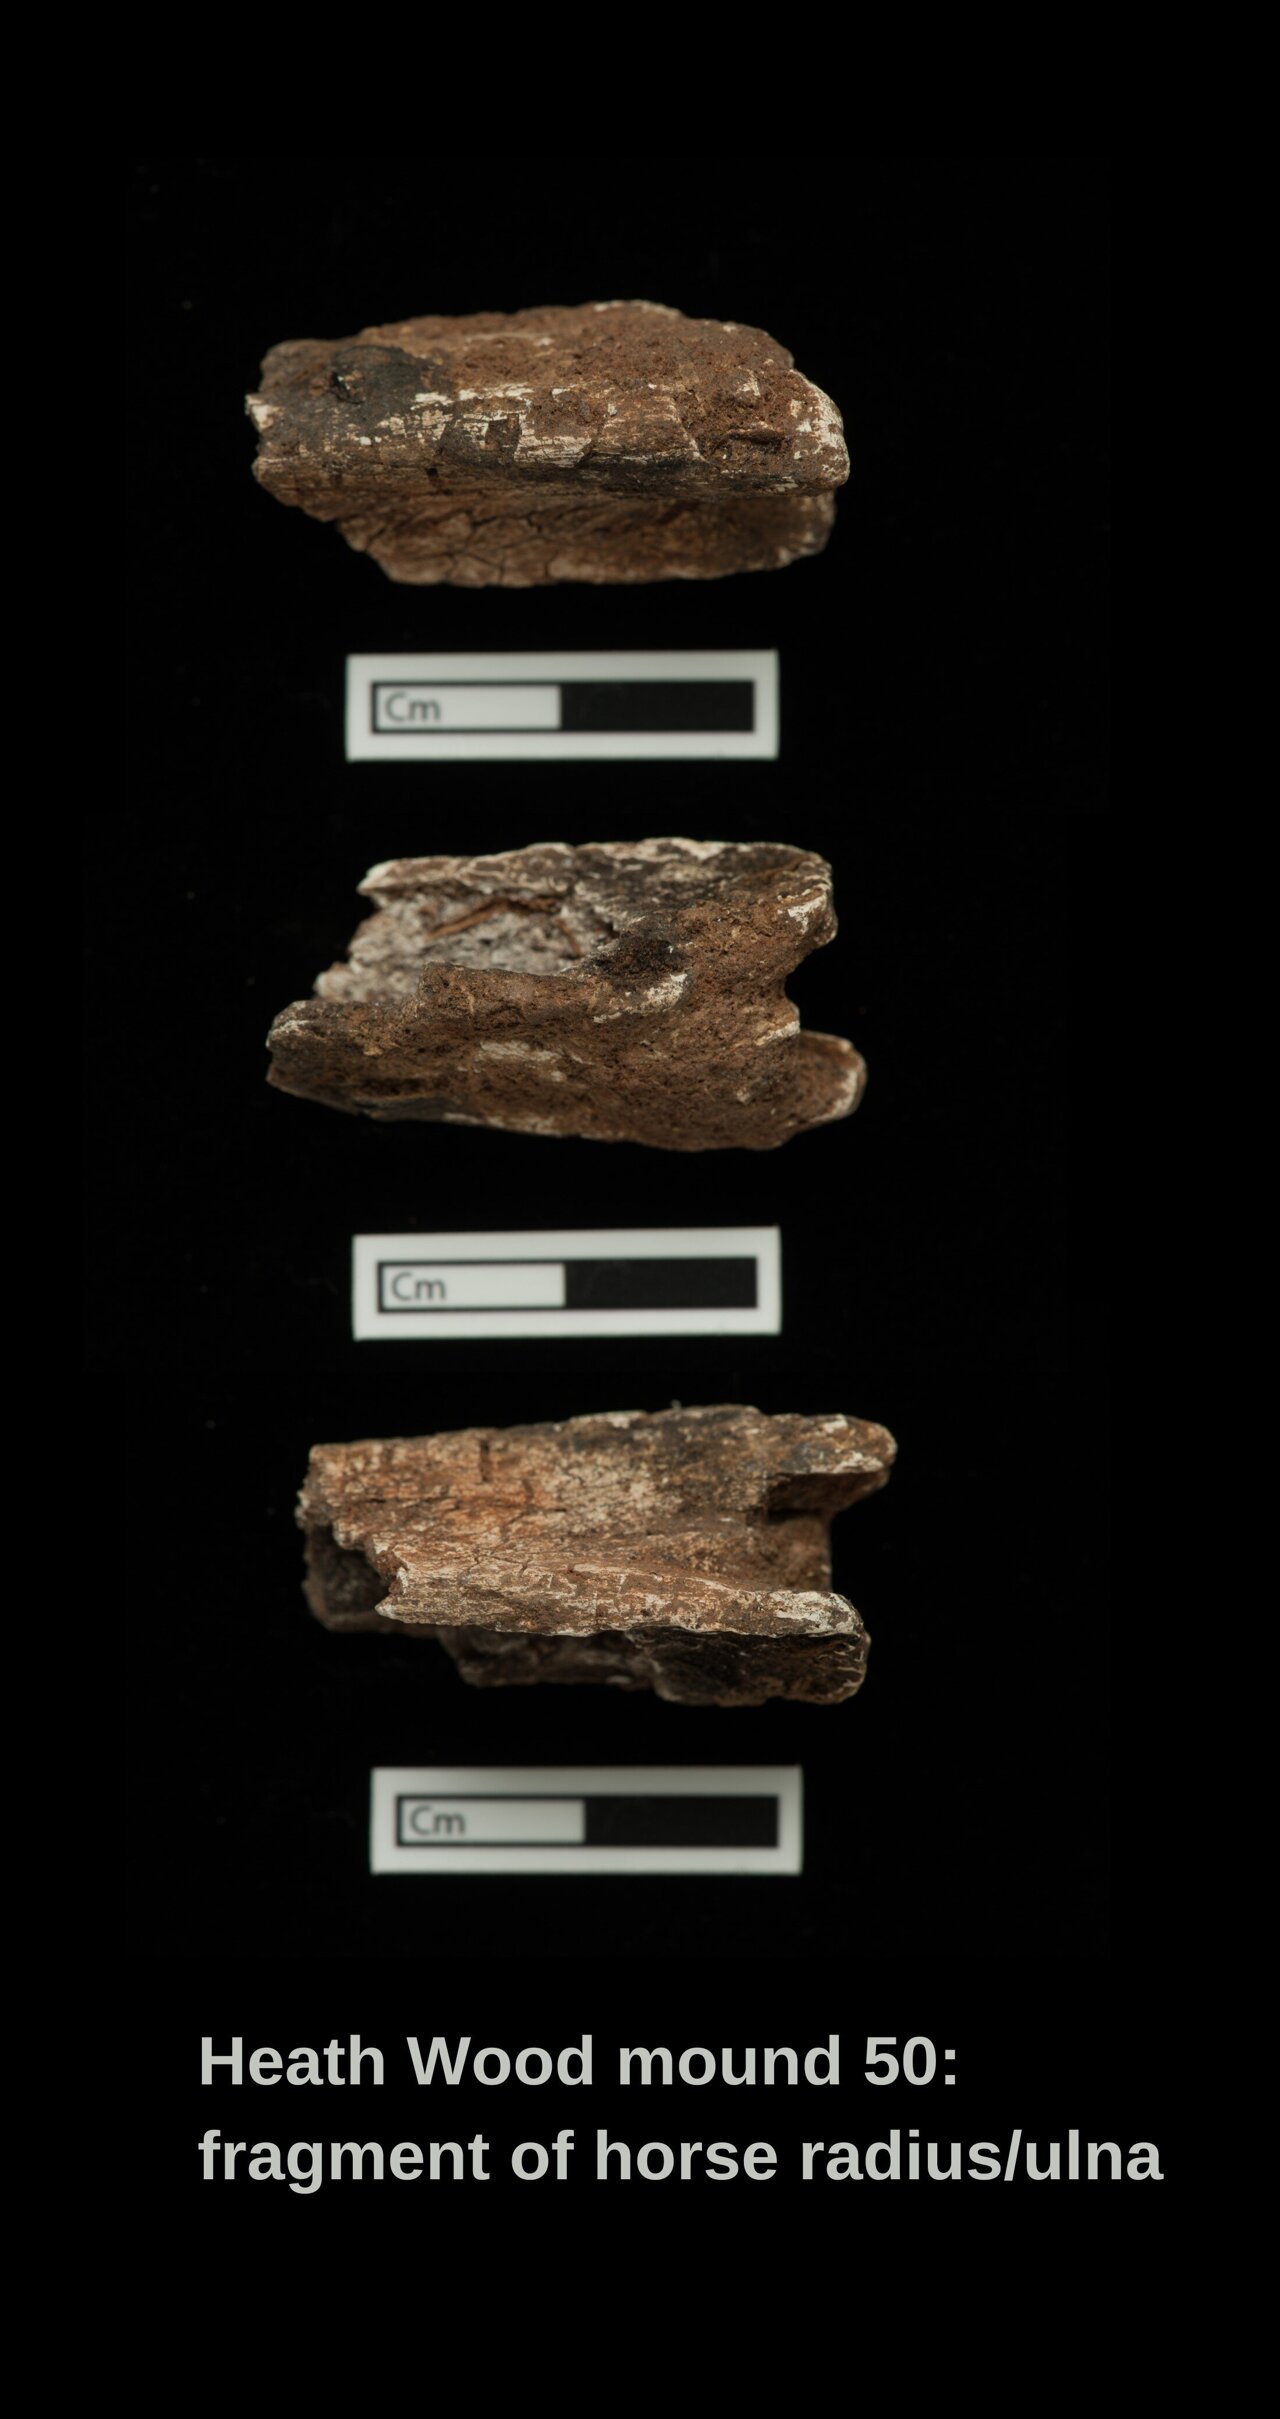 Fragment of a sampled cremated horse radius/ulna from faus mound 50 at Heath Wood.